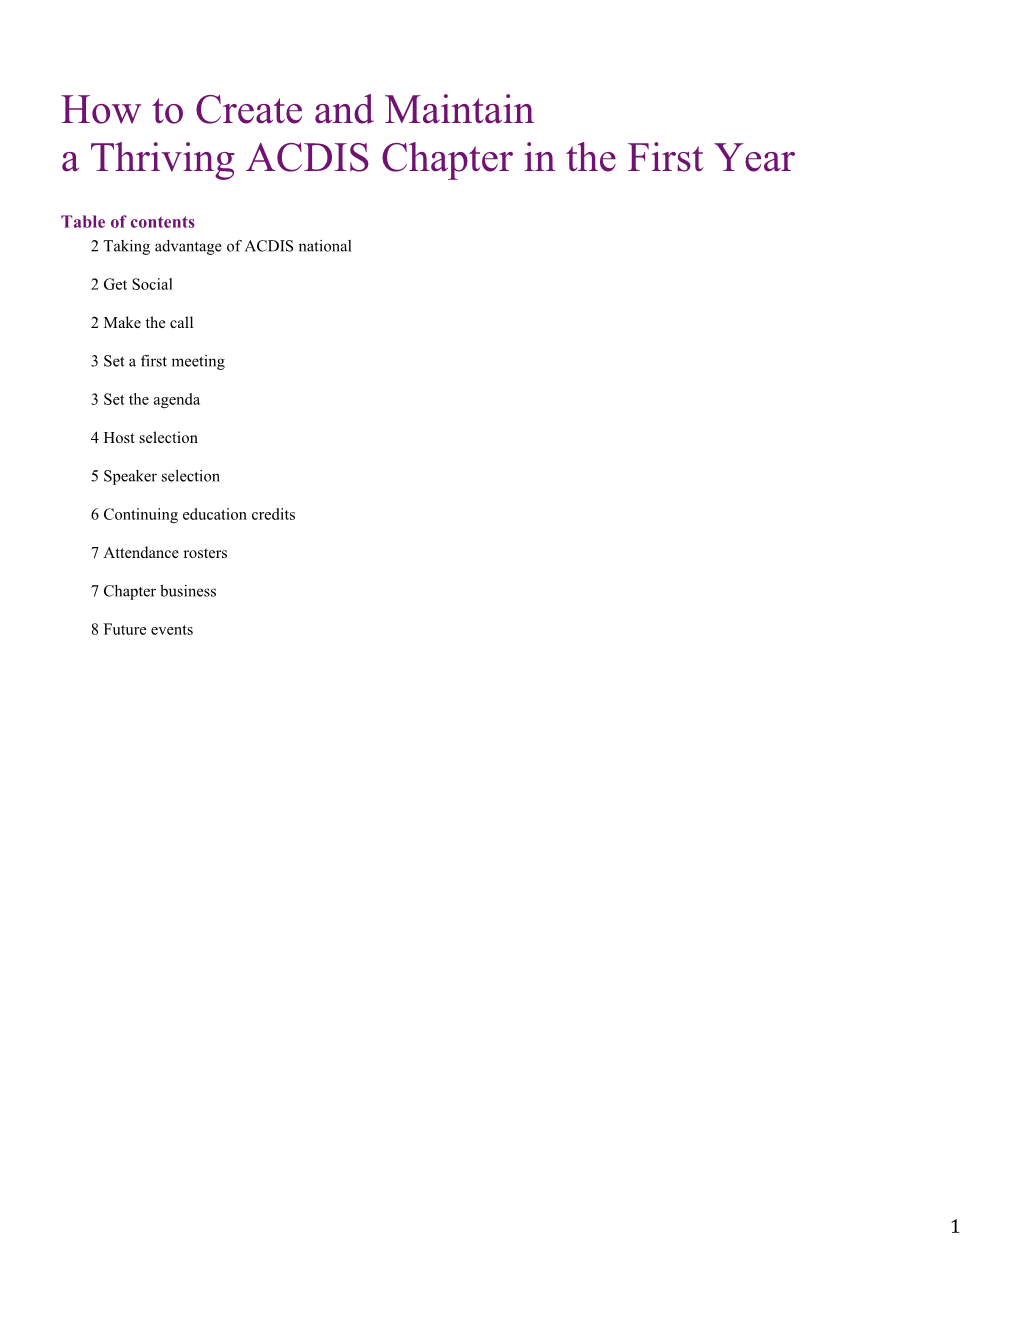 How to Create and Maintain a Thriving ACDIS Chapter in the First Year